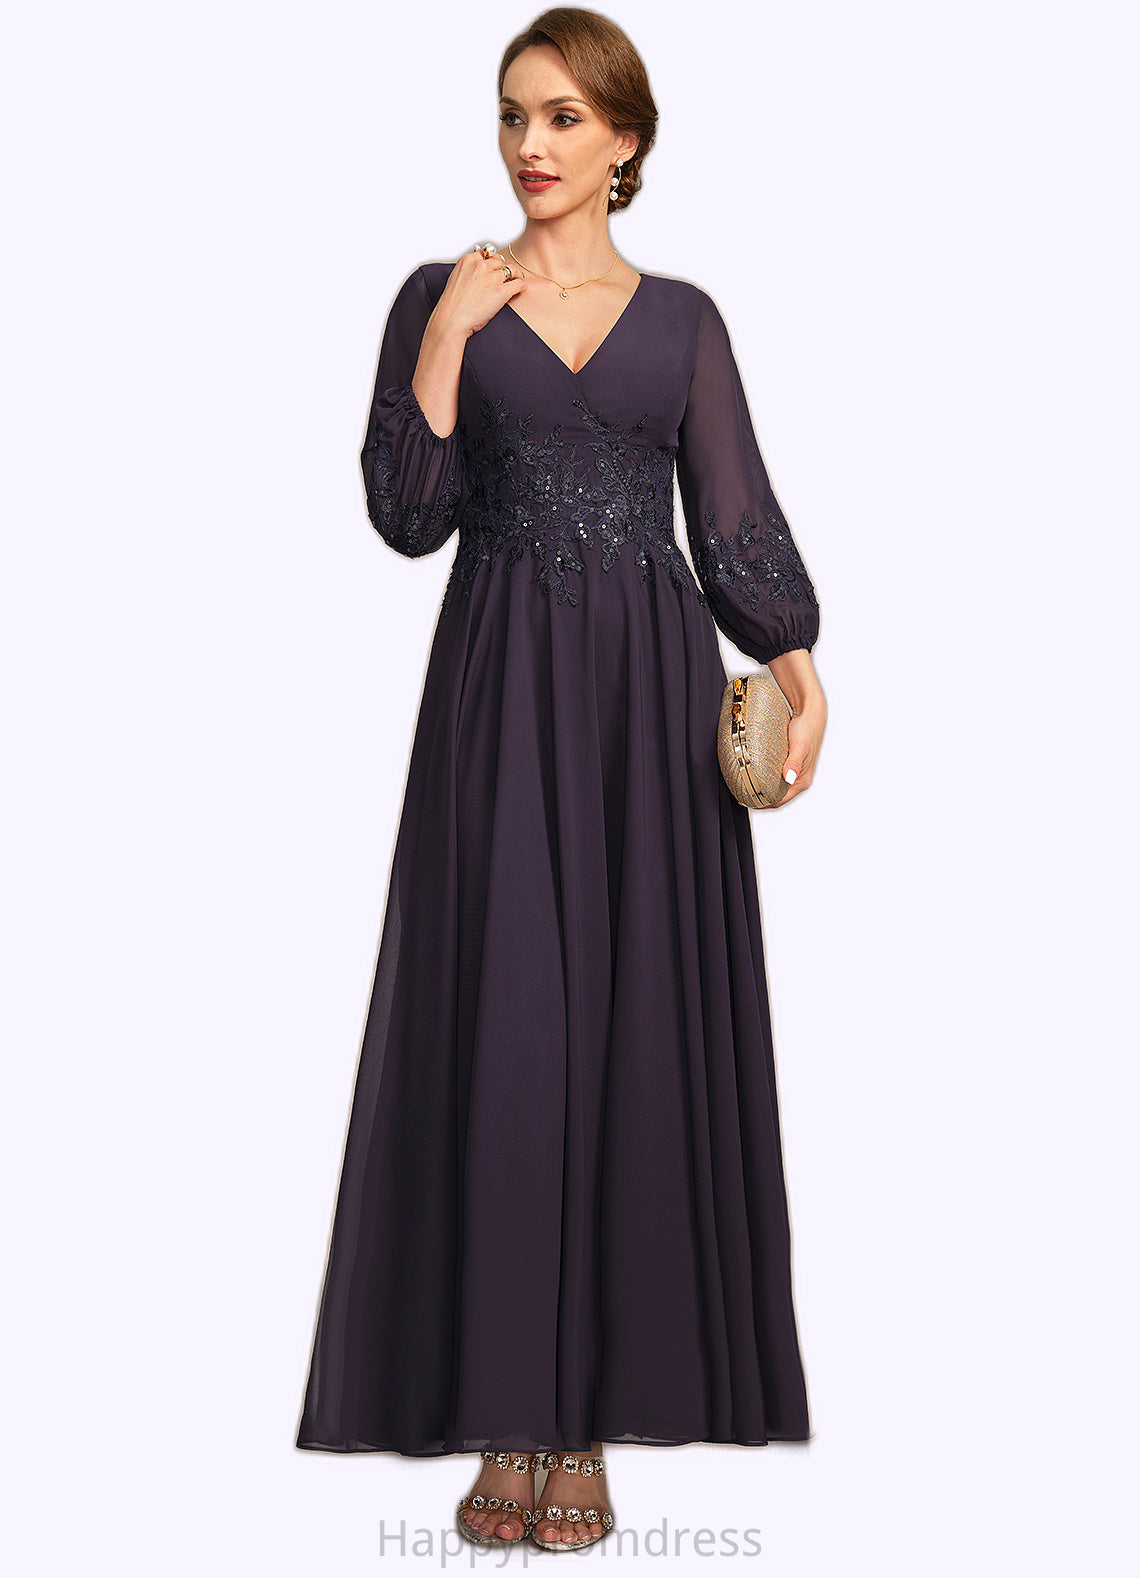 Bria A-line V-Neck Ankle-Length Chiffon Lace Mother of the Bride Dress With Sequins XXSP0021655